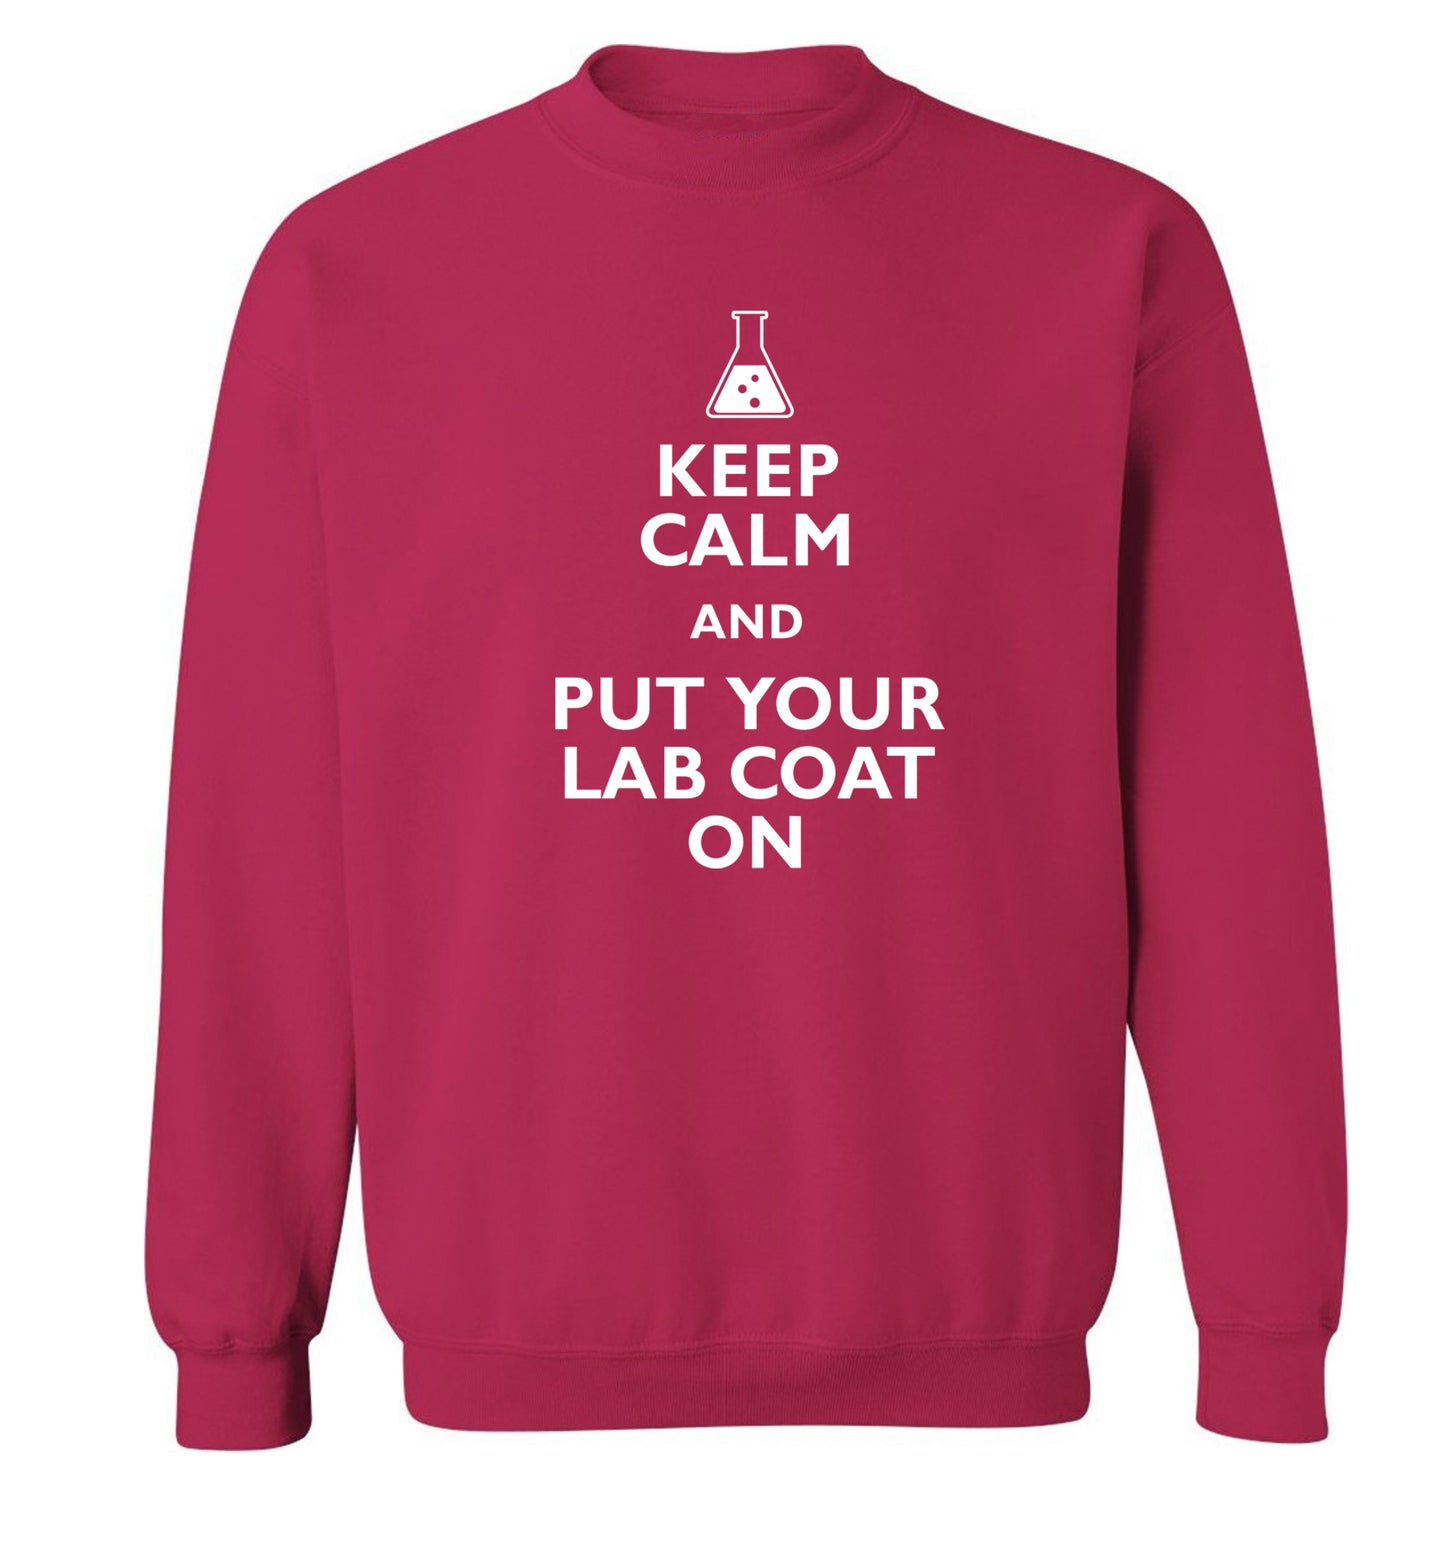 Keep calm and put your lab coat on Adult's unisex pink Sweater 2XL